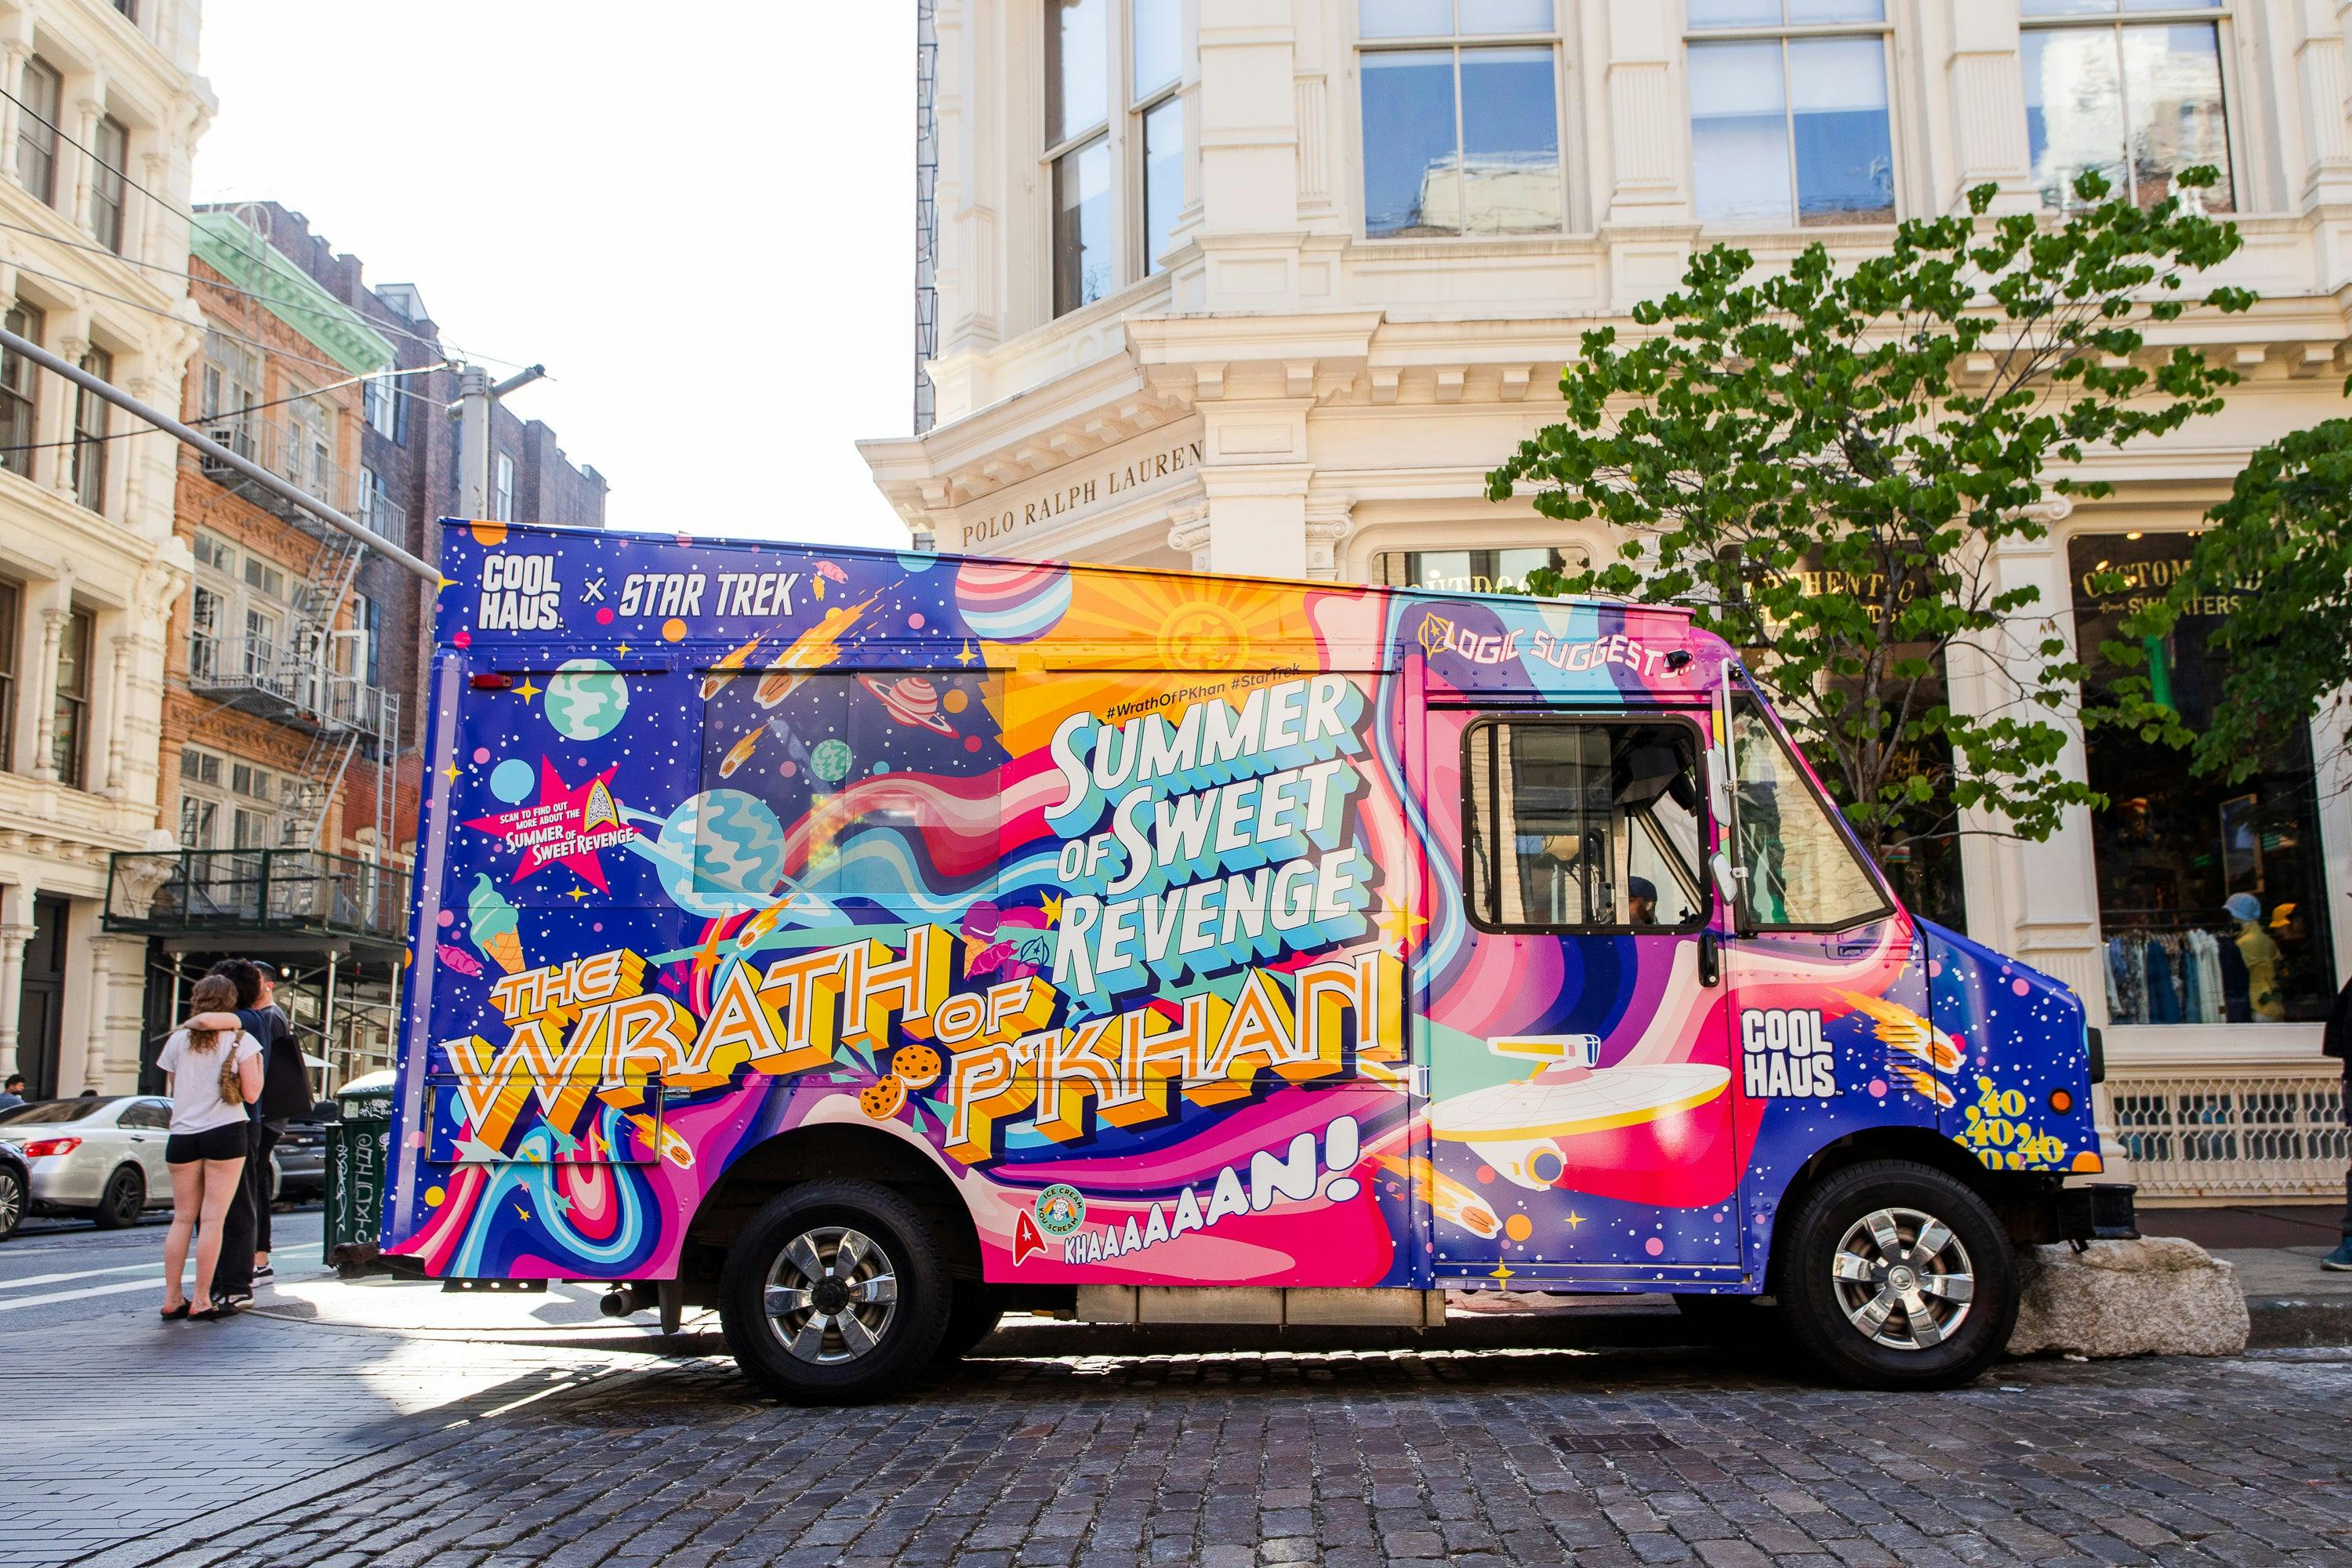 The ice cream truck, which is covered in bright colors and reads "The Summer of Sweet Revenge" and "The Wrath of P'Khan", sits parked on the street.